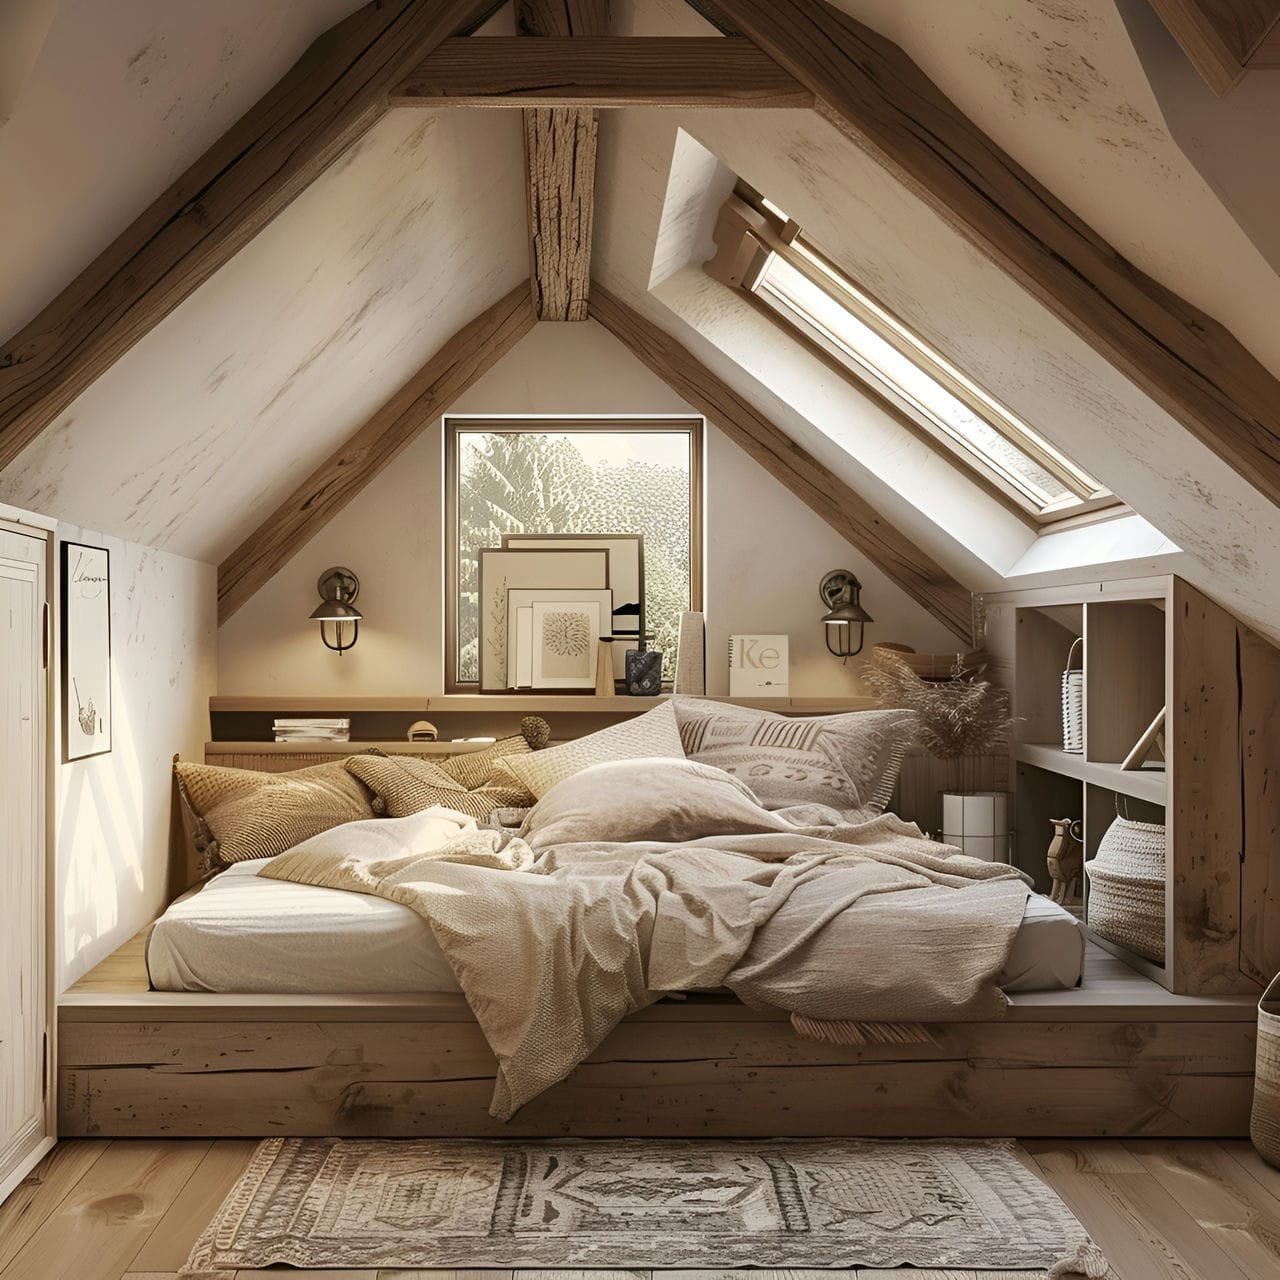 Attic: size, functionality, uses, furniture and renovation